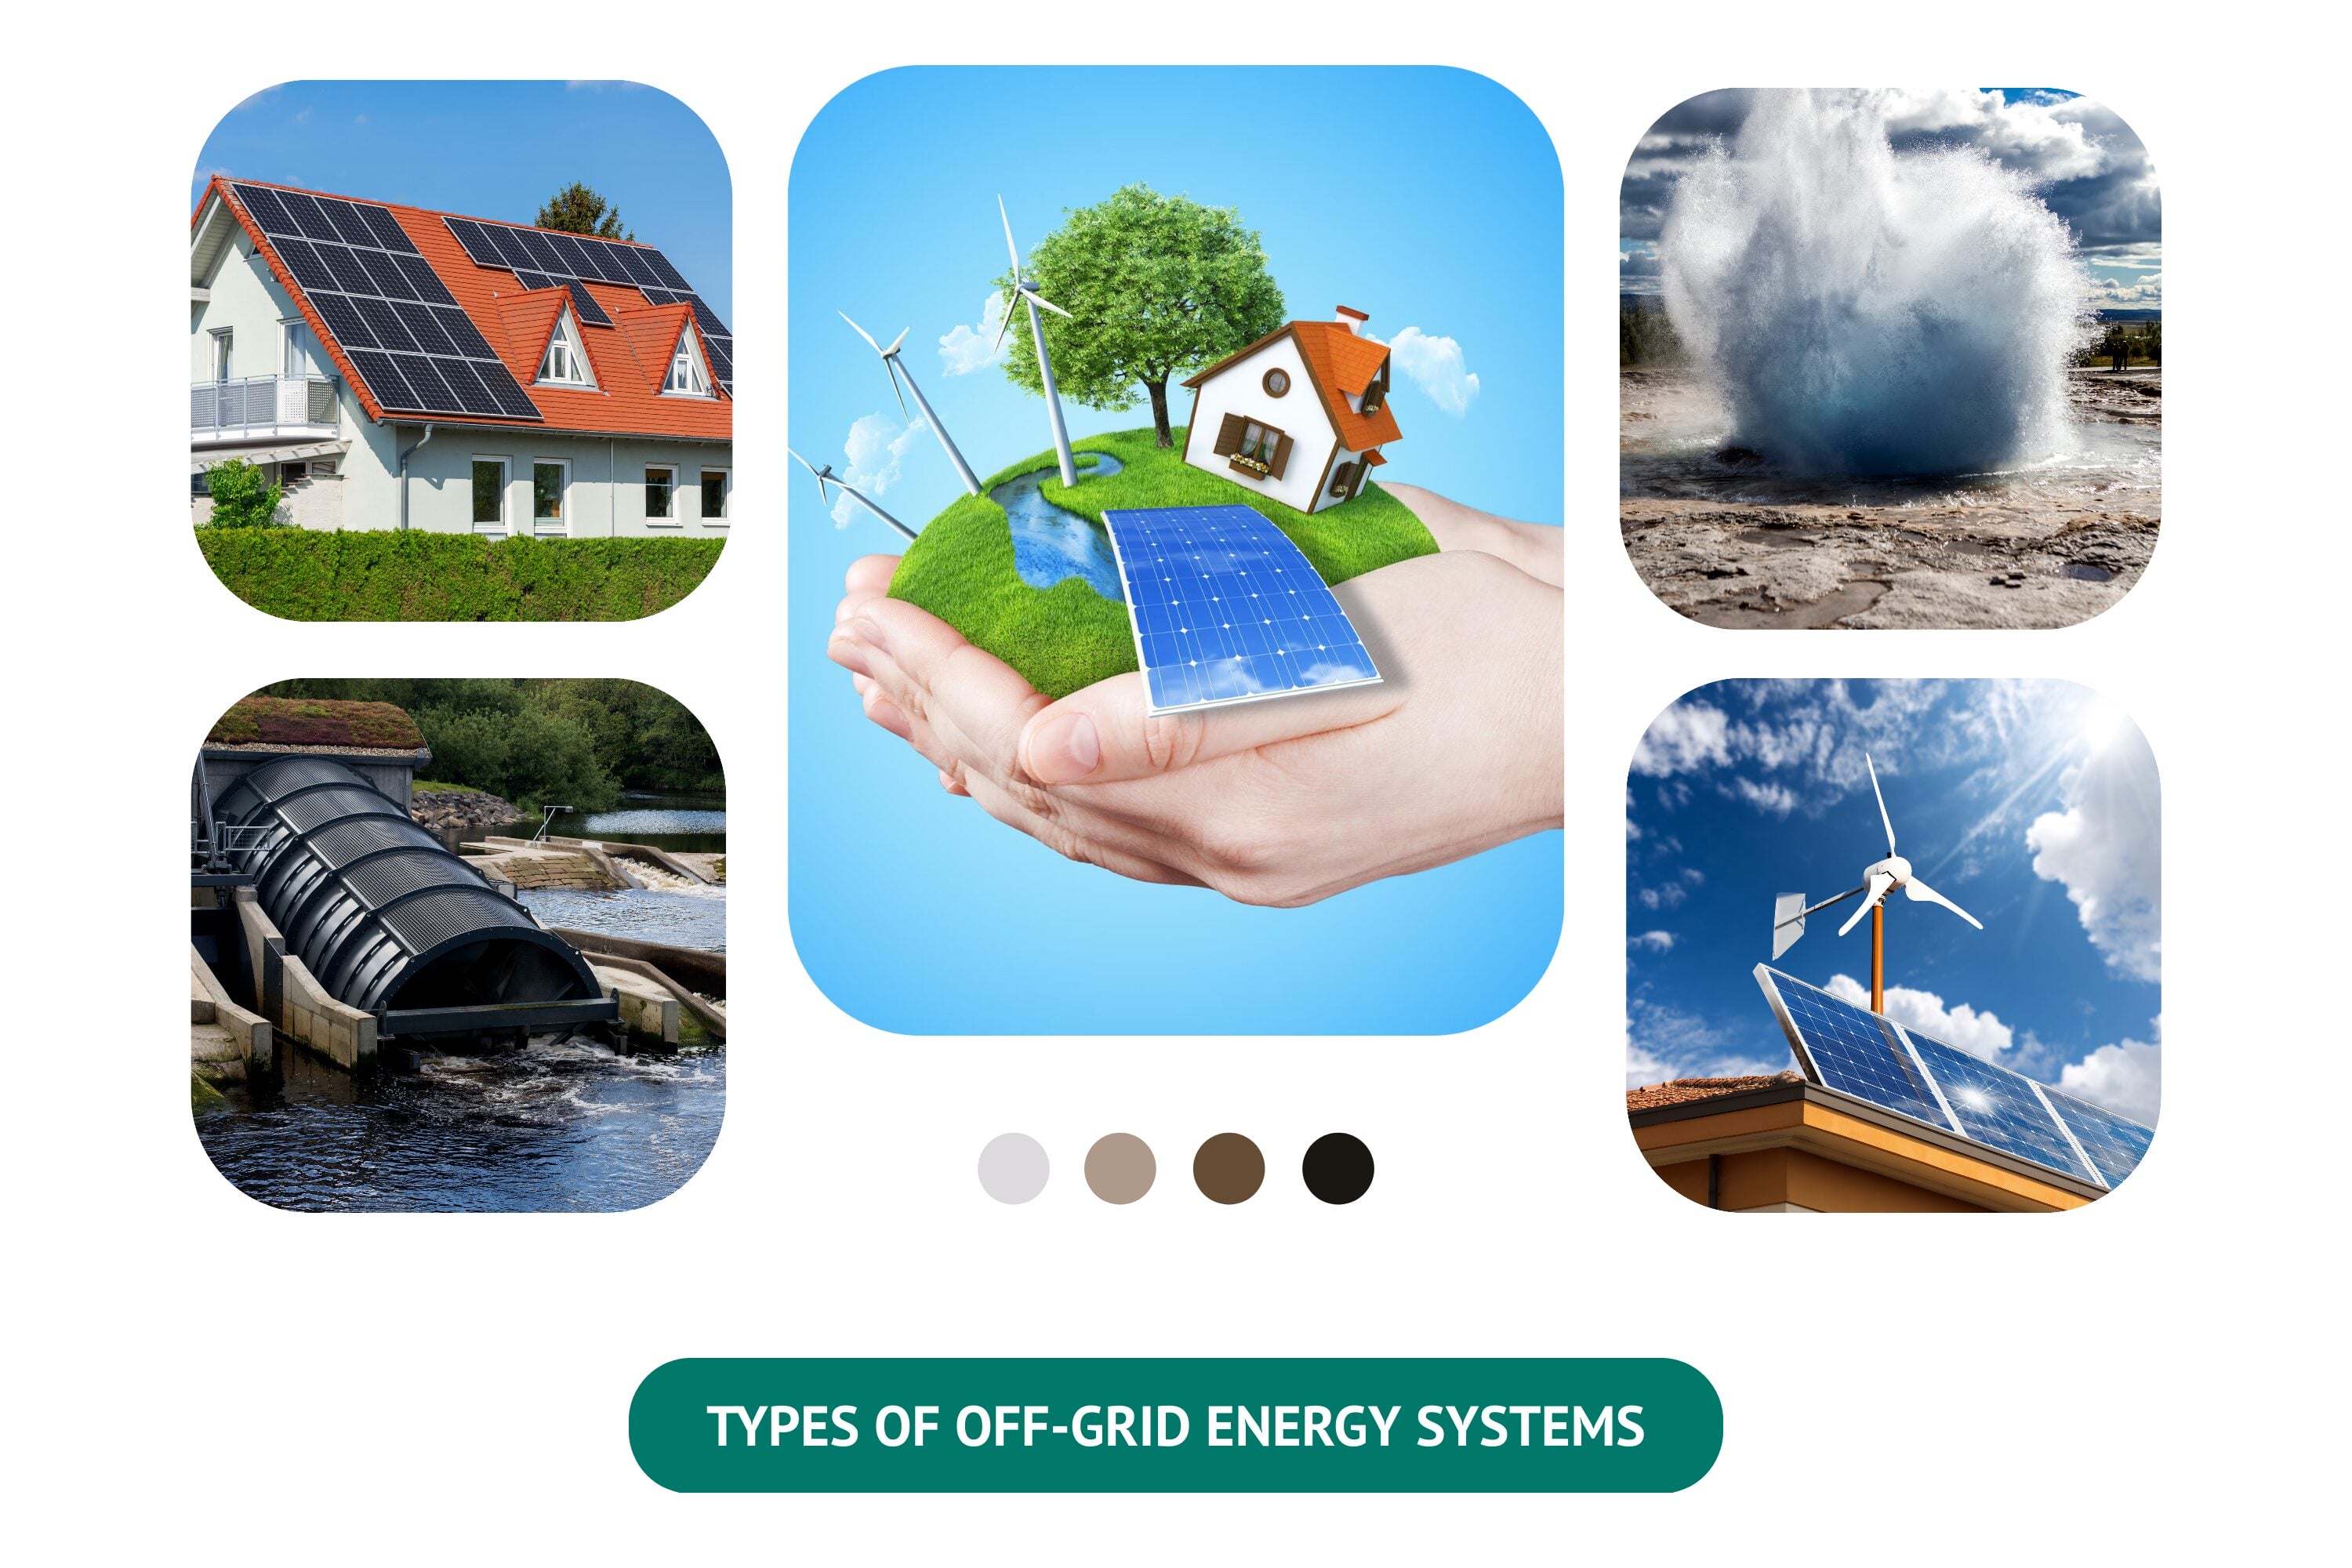 Different types of off-grid energy systems.